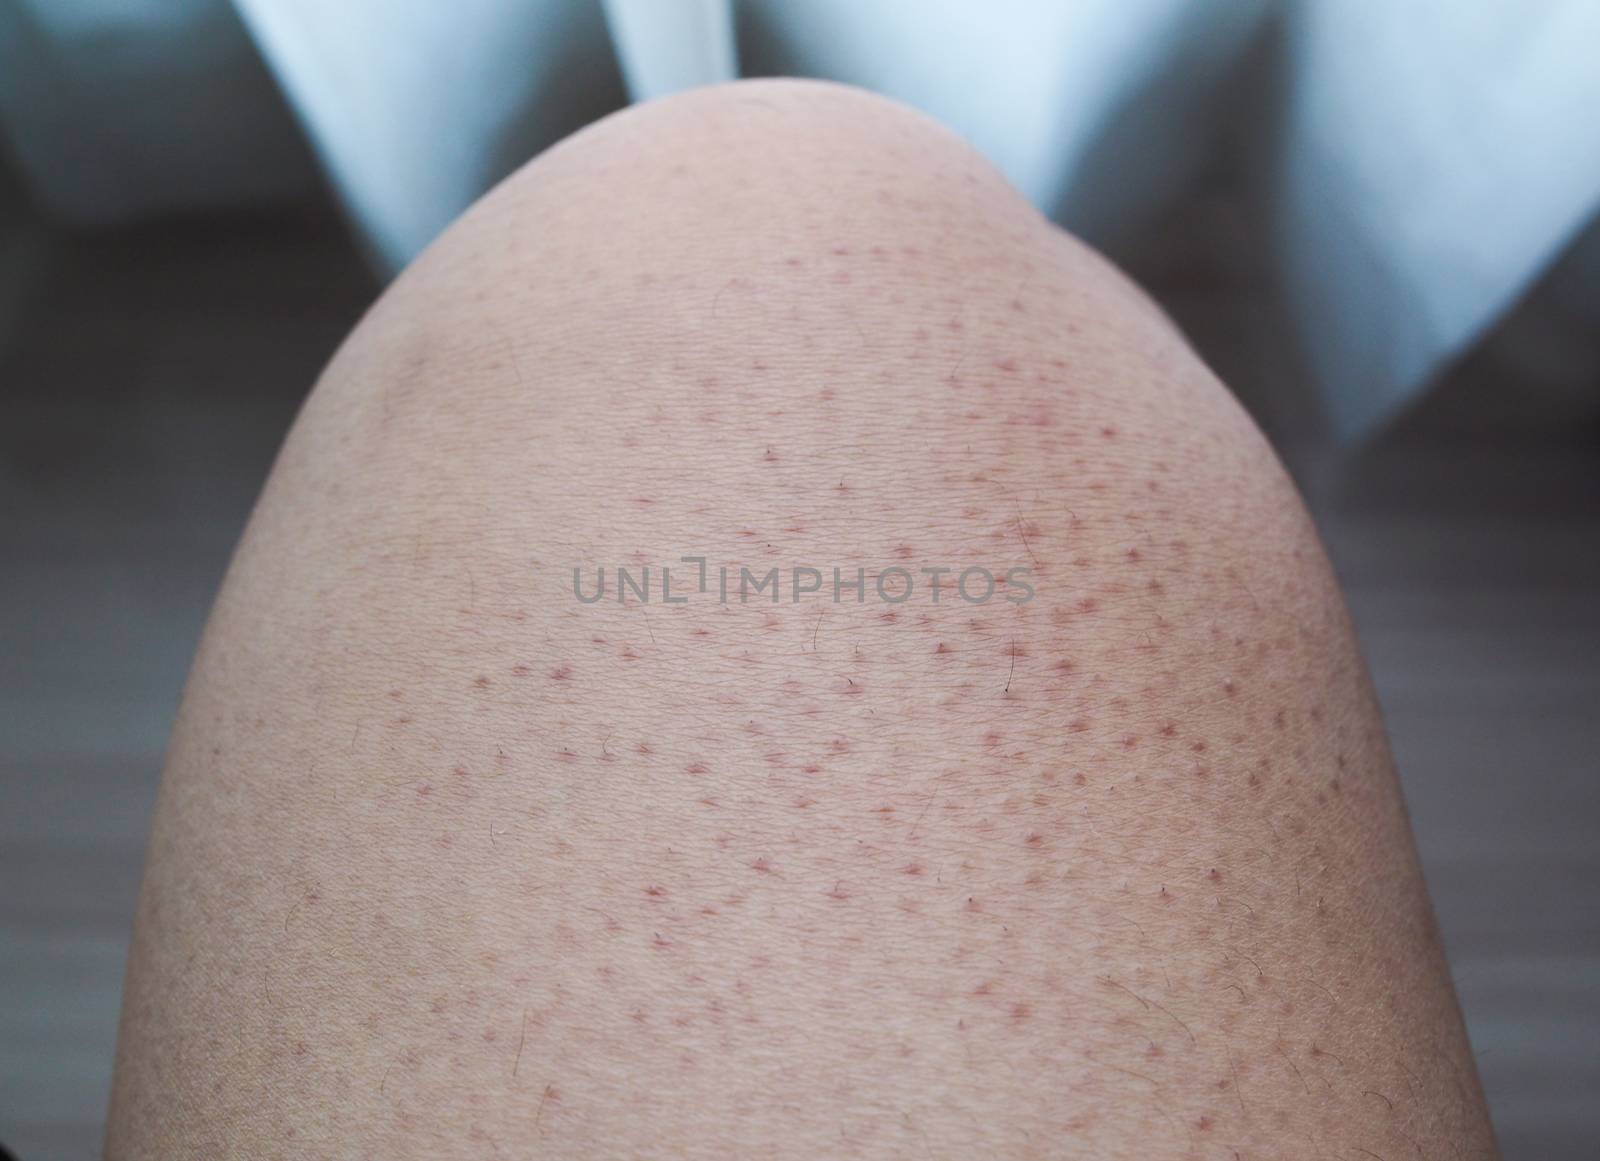 Problems of Body Skin, large pores and dark colors on legs.